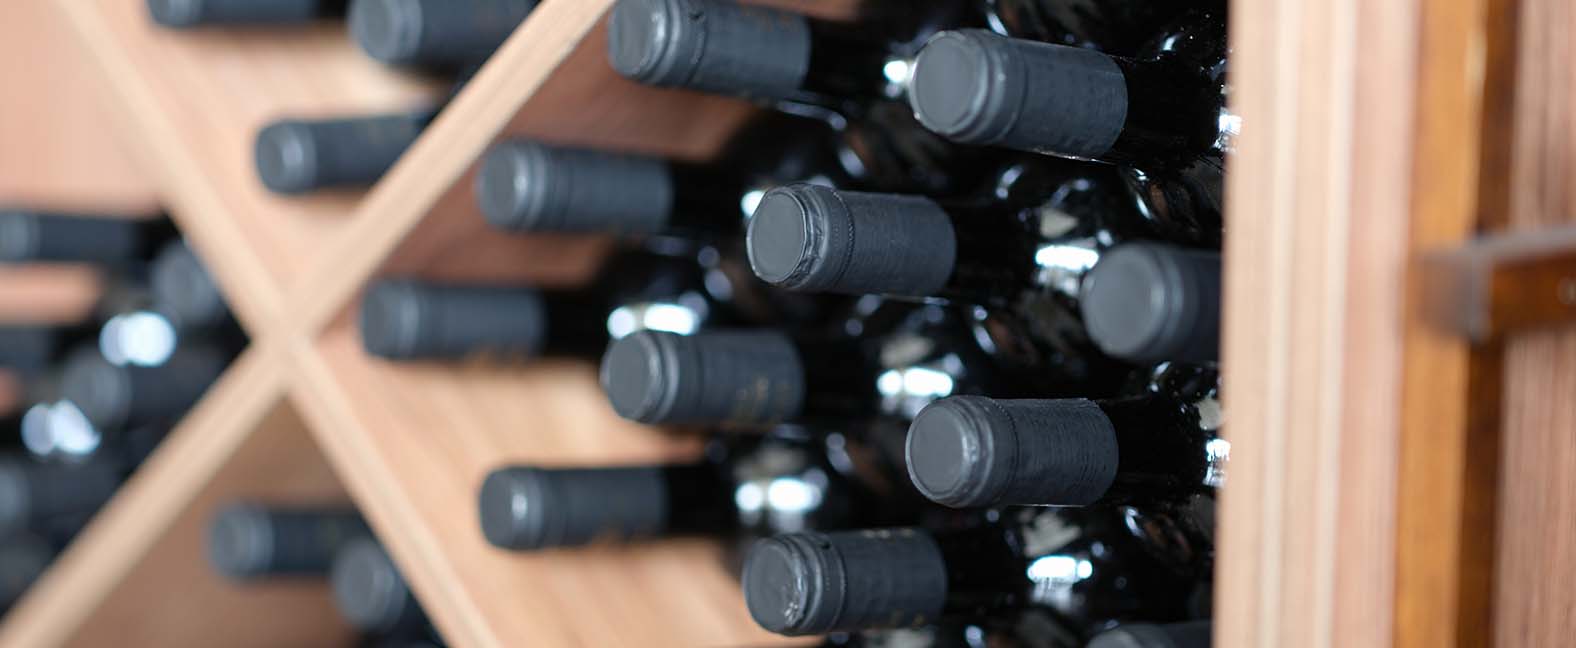 Various wine bottles are stacked on wooden racks.